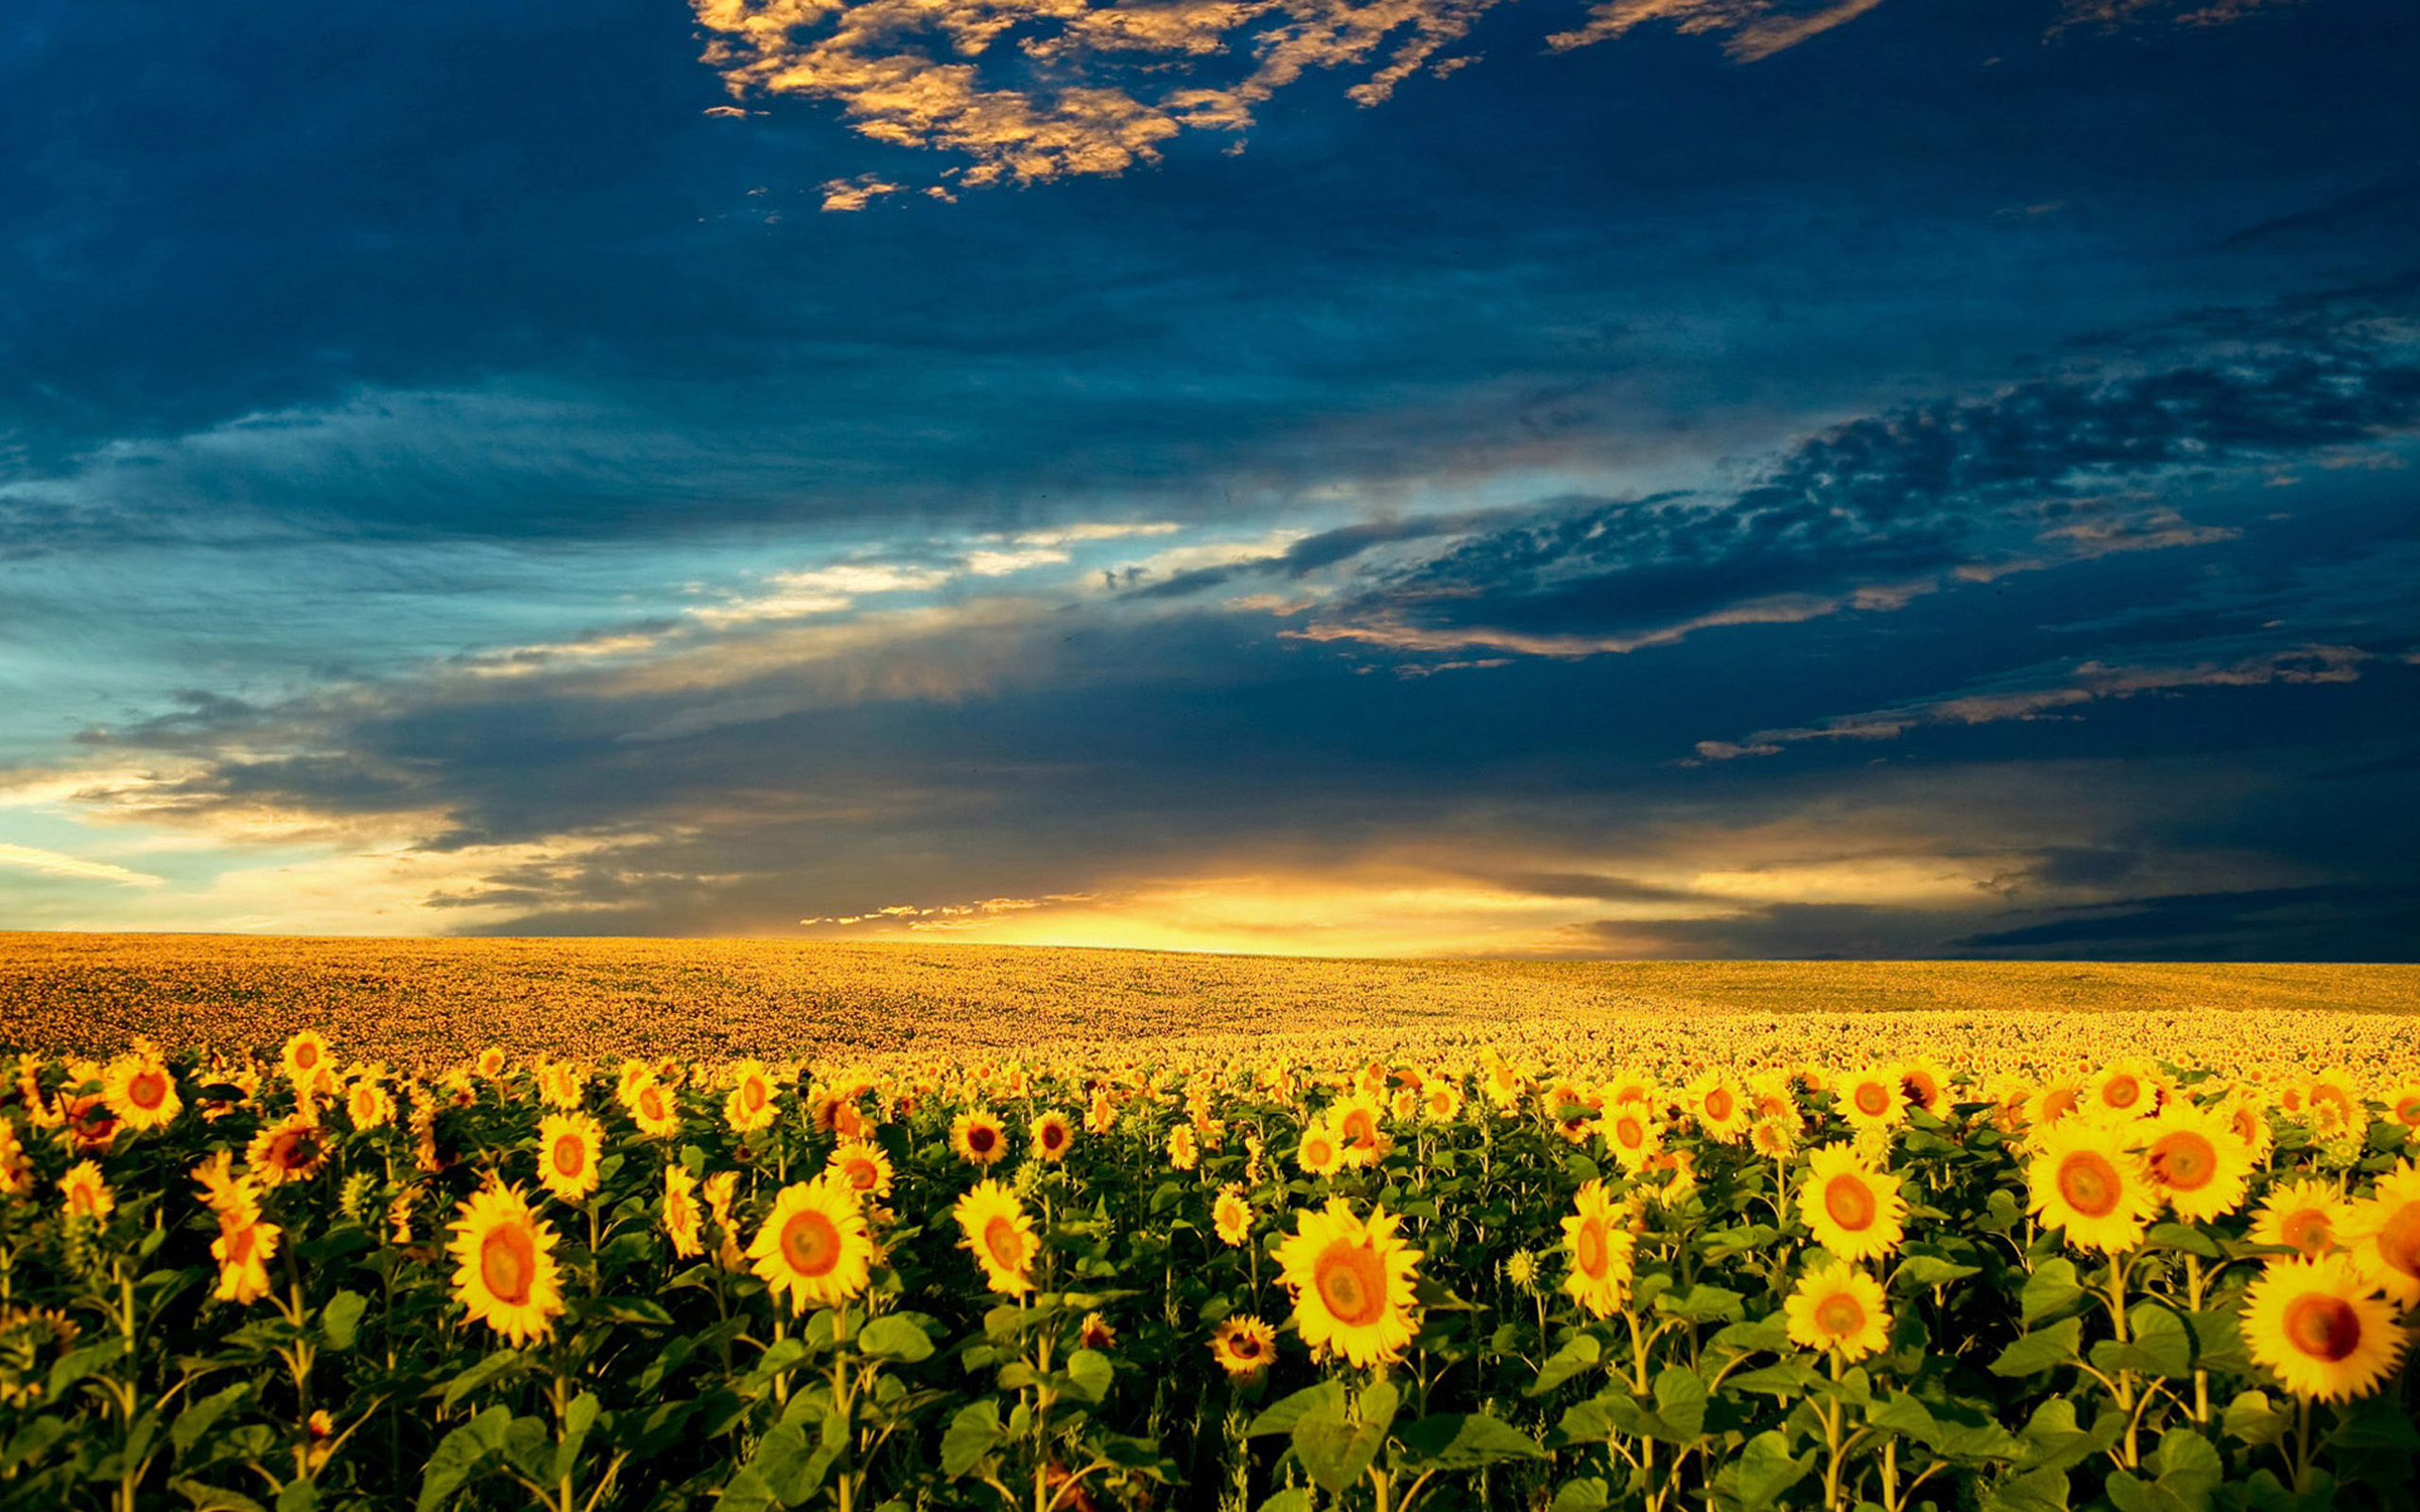 great spring images hd background, blooming sunflowers, view, sky